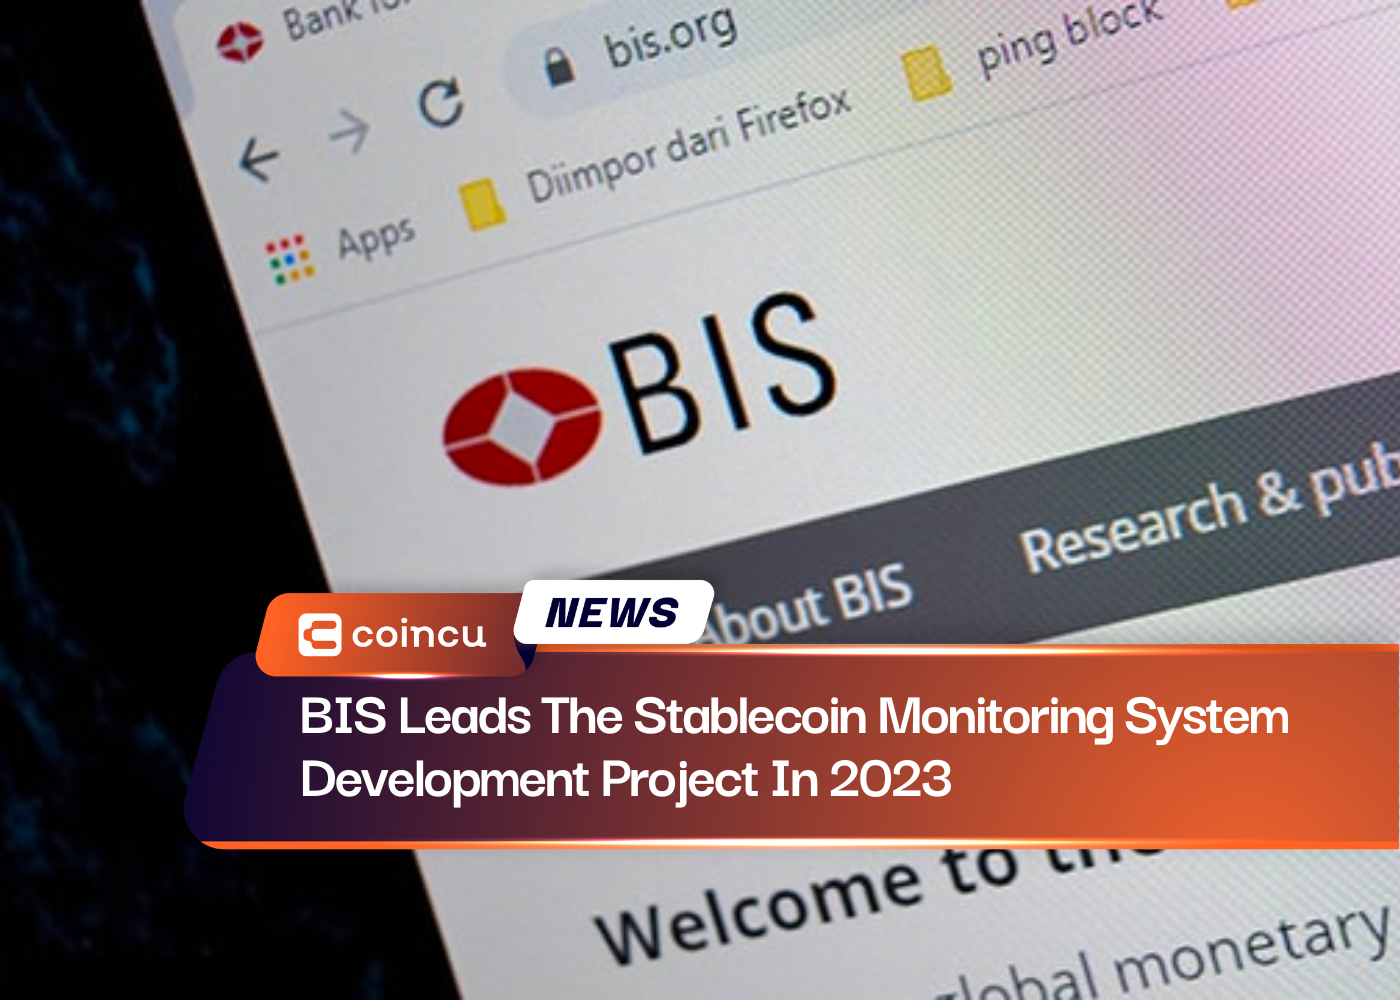 BIS Leads The Stablecoin Monitoring System Development Project In 2023